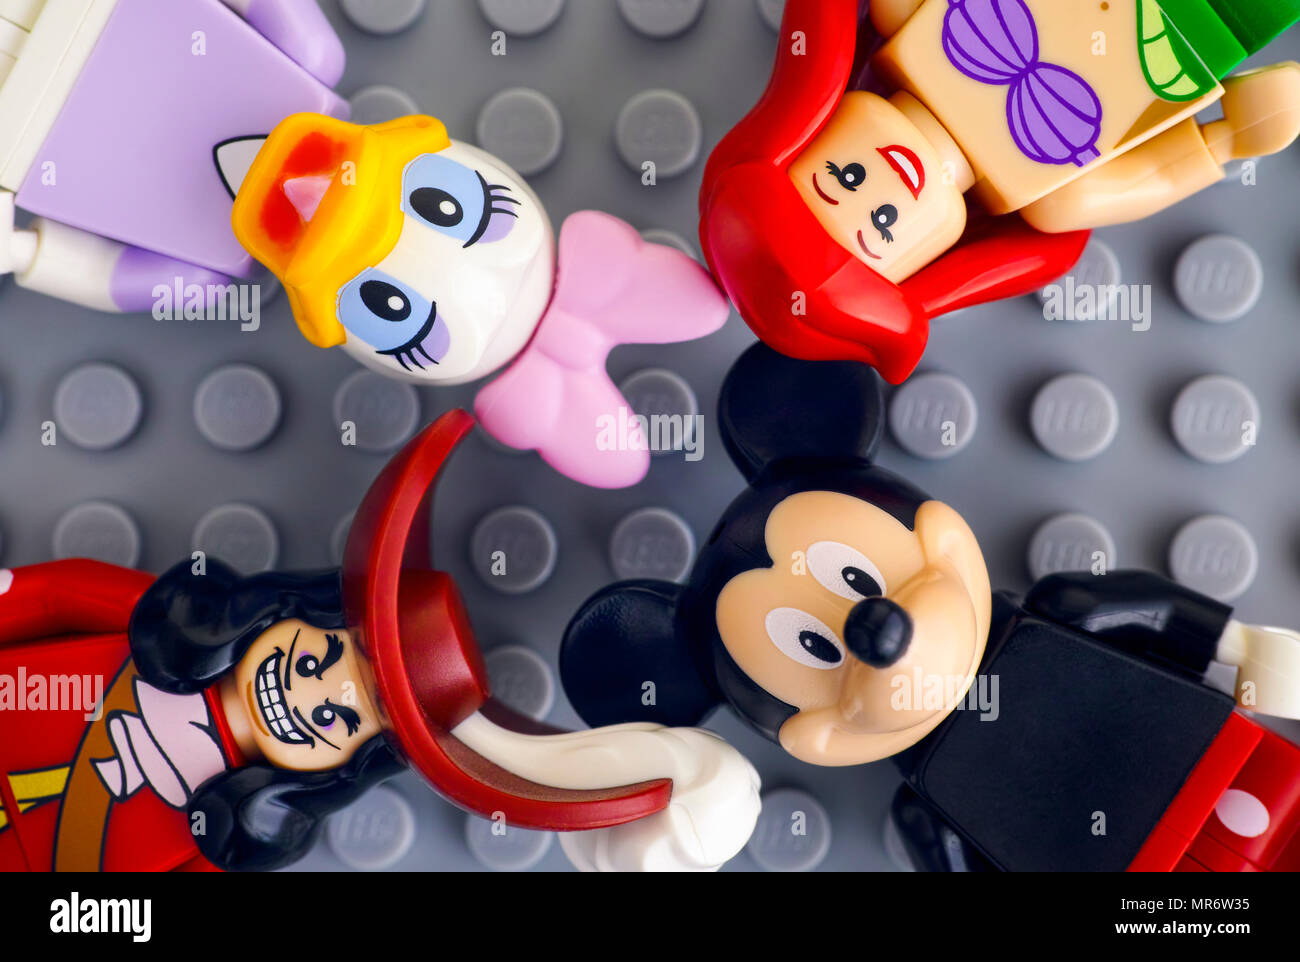 Tambov, Russian Federation - May 20, 2018 Four Lego Disney minifigures - Mickey Mouse, Daisy Duck, Ariel, Captain Hook, on gray background. Stock Photo